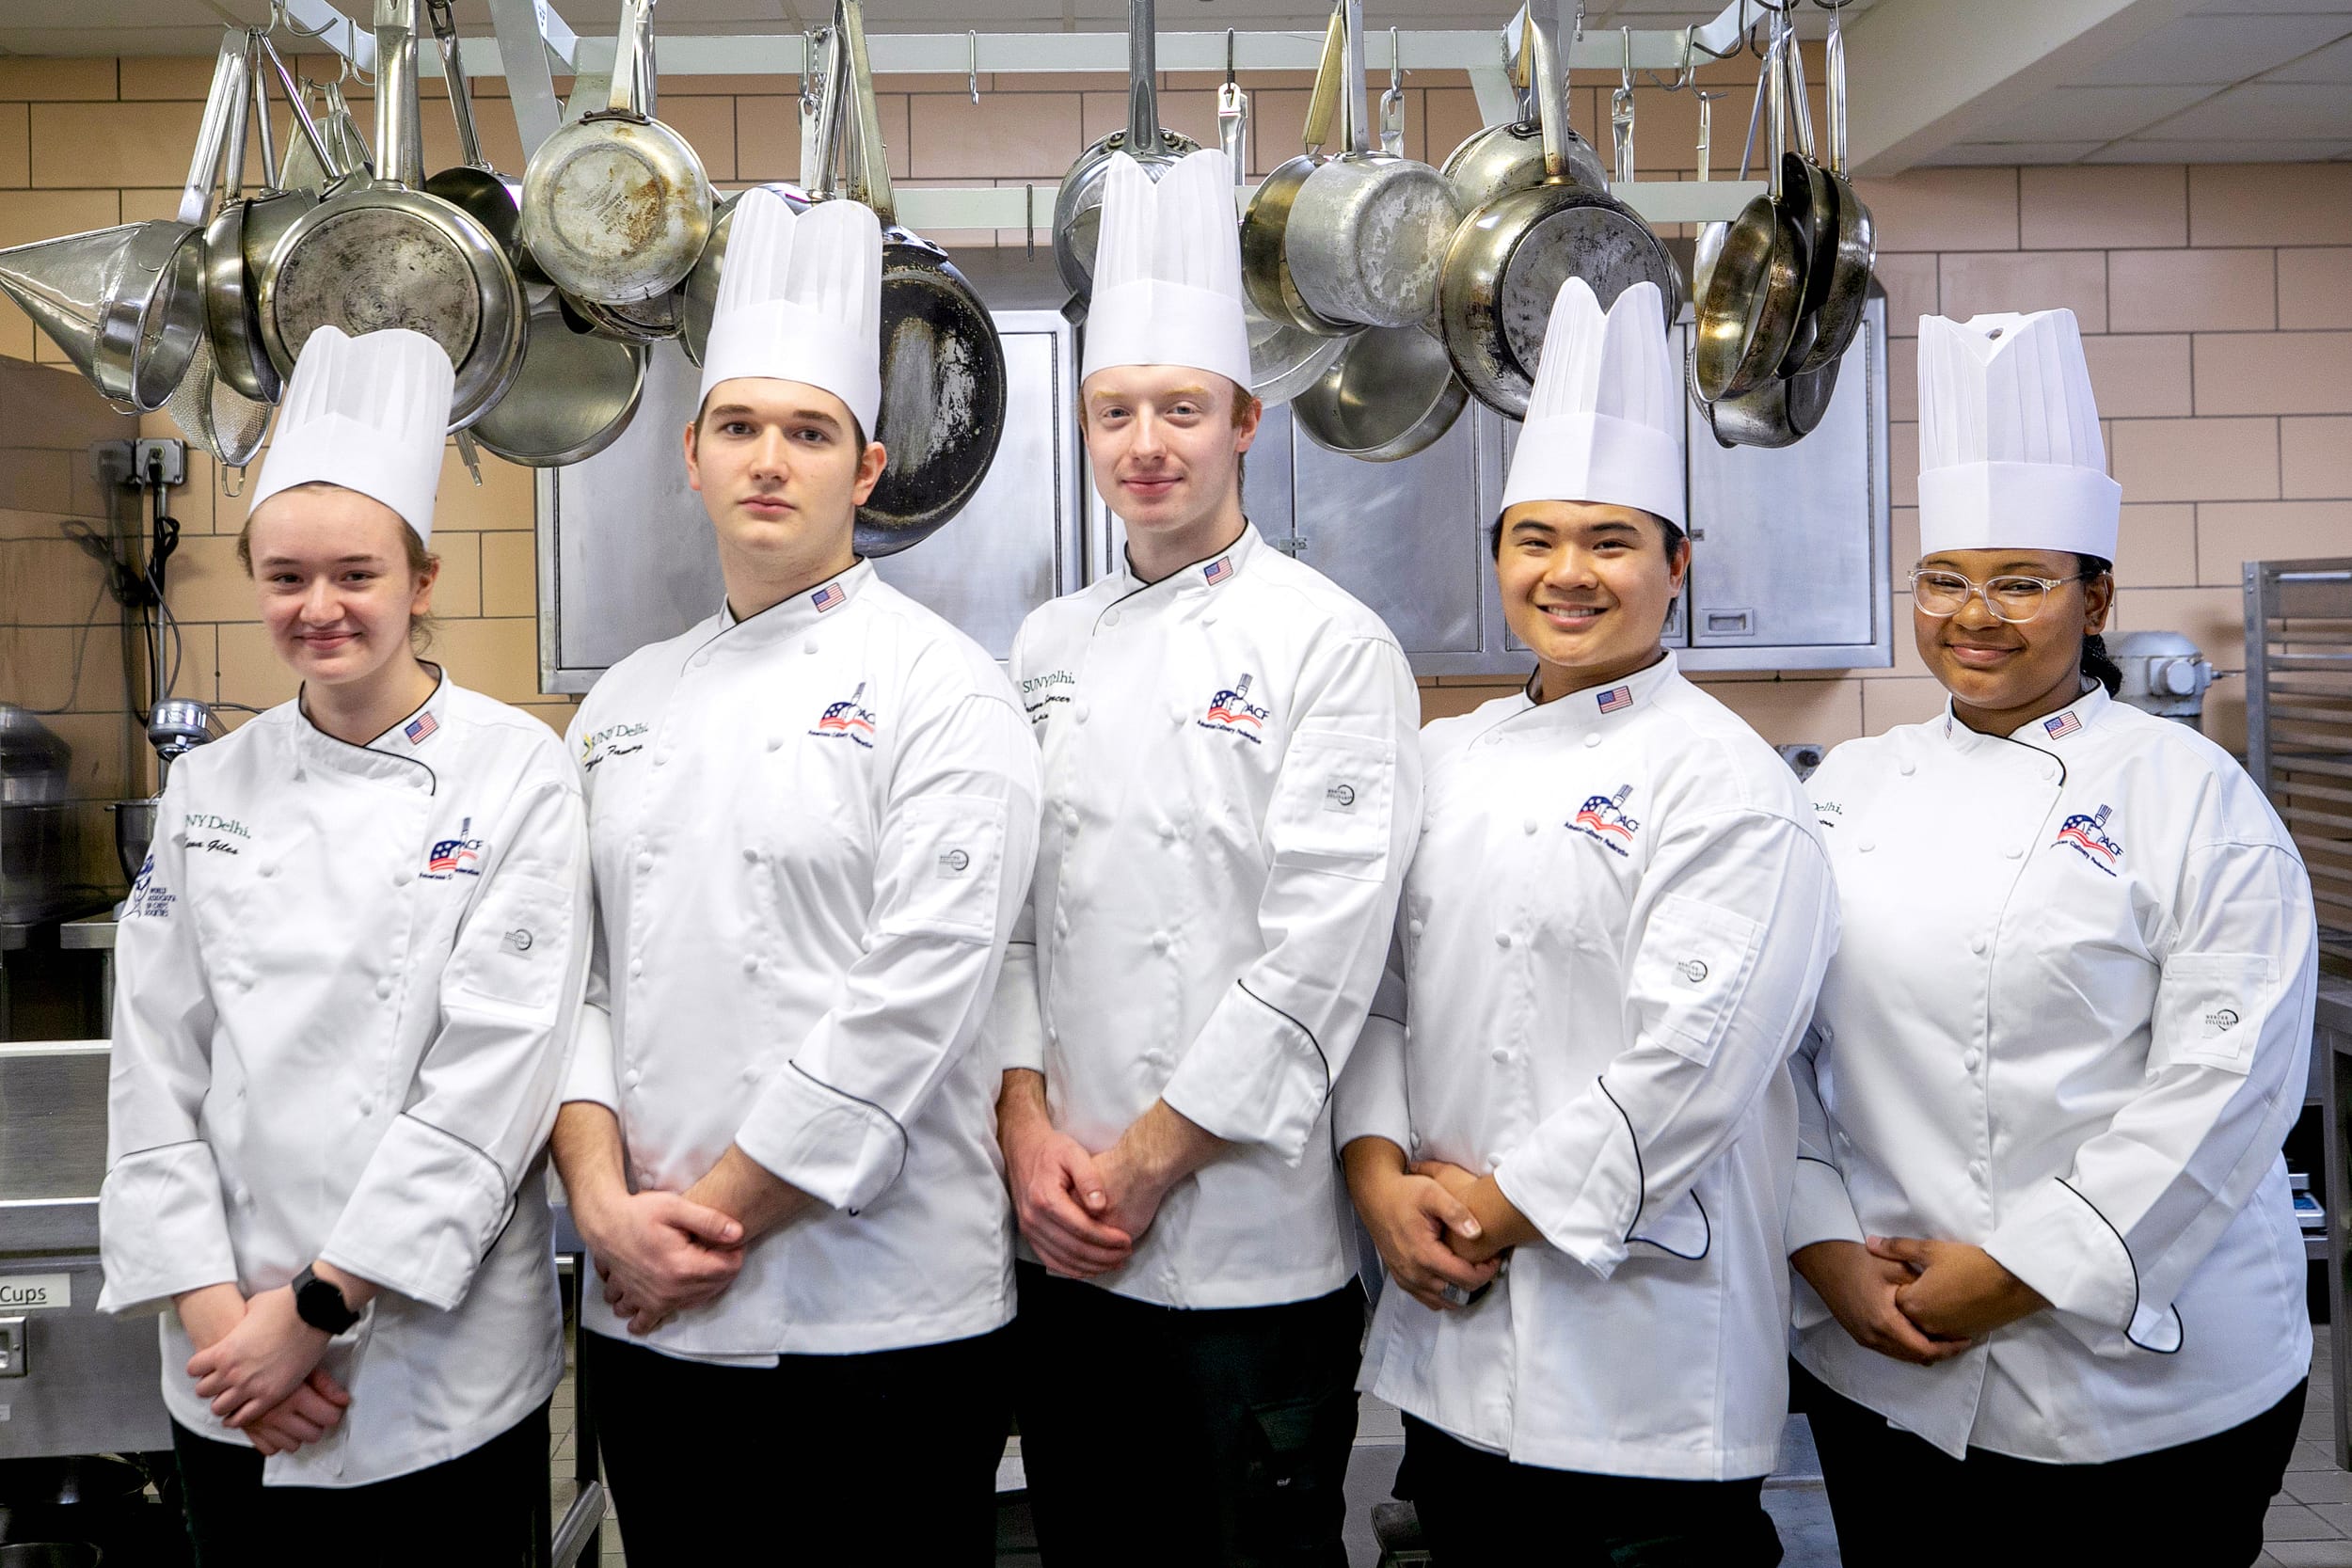 SUNY Delhi Culinary Team Wins Regional Competition, Heads to Nationals